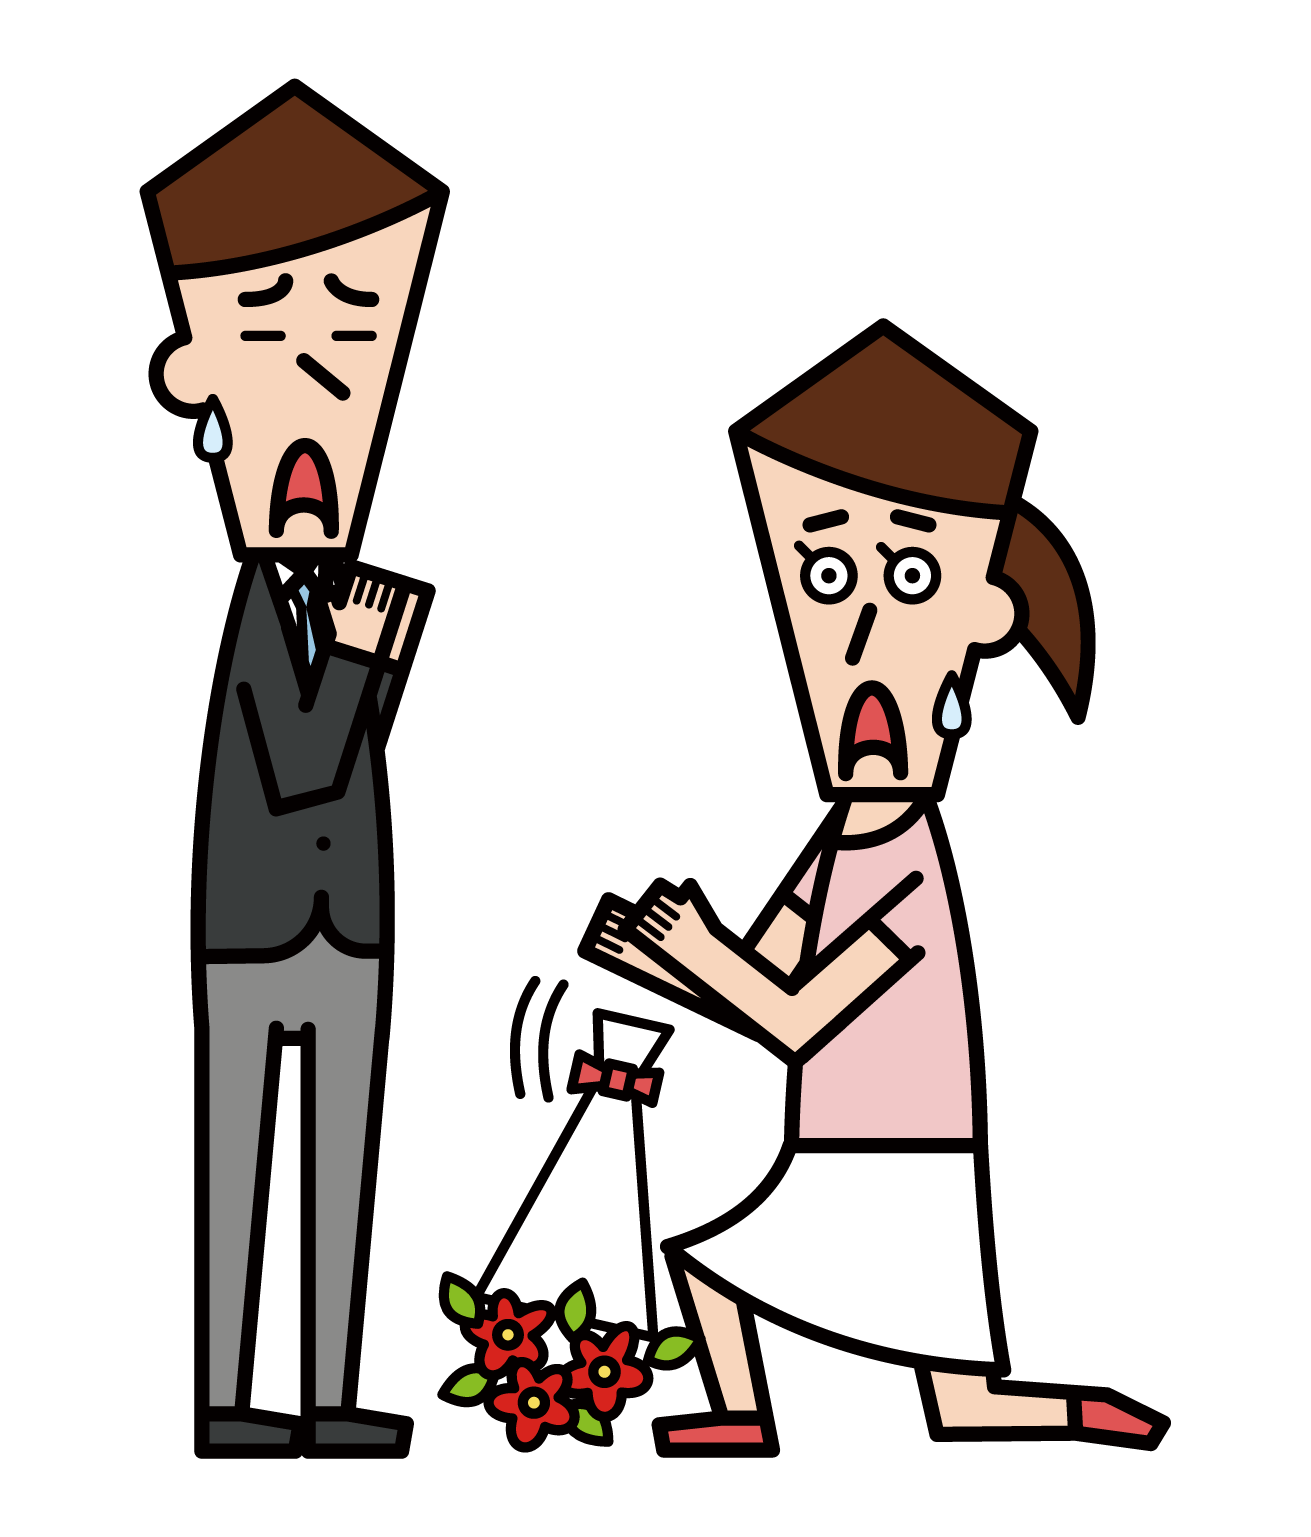 Illustration of a woman who failed to propose